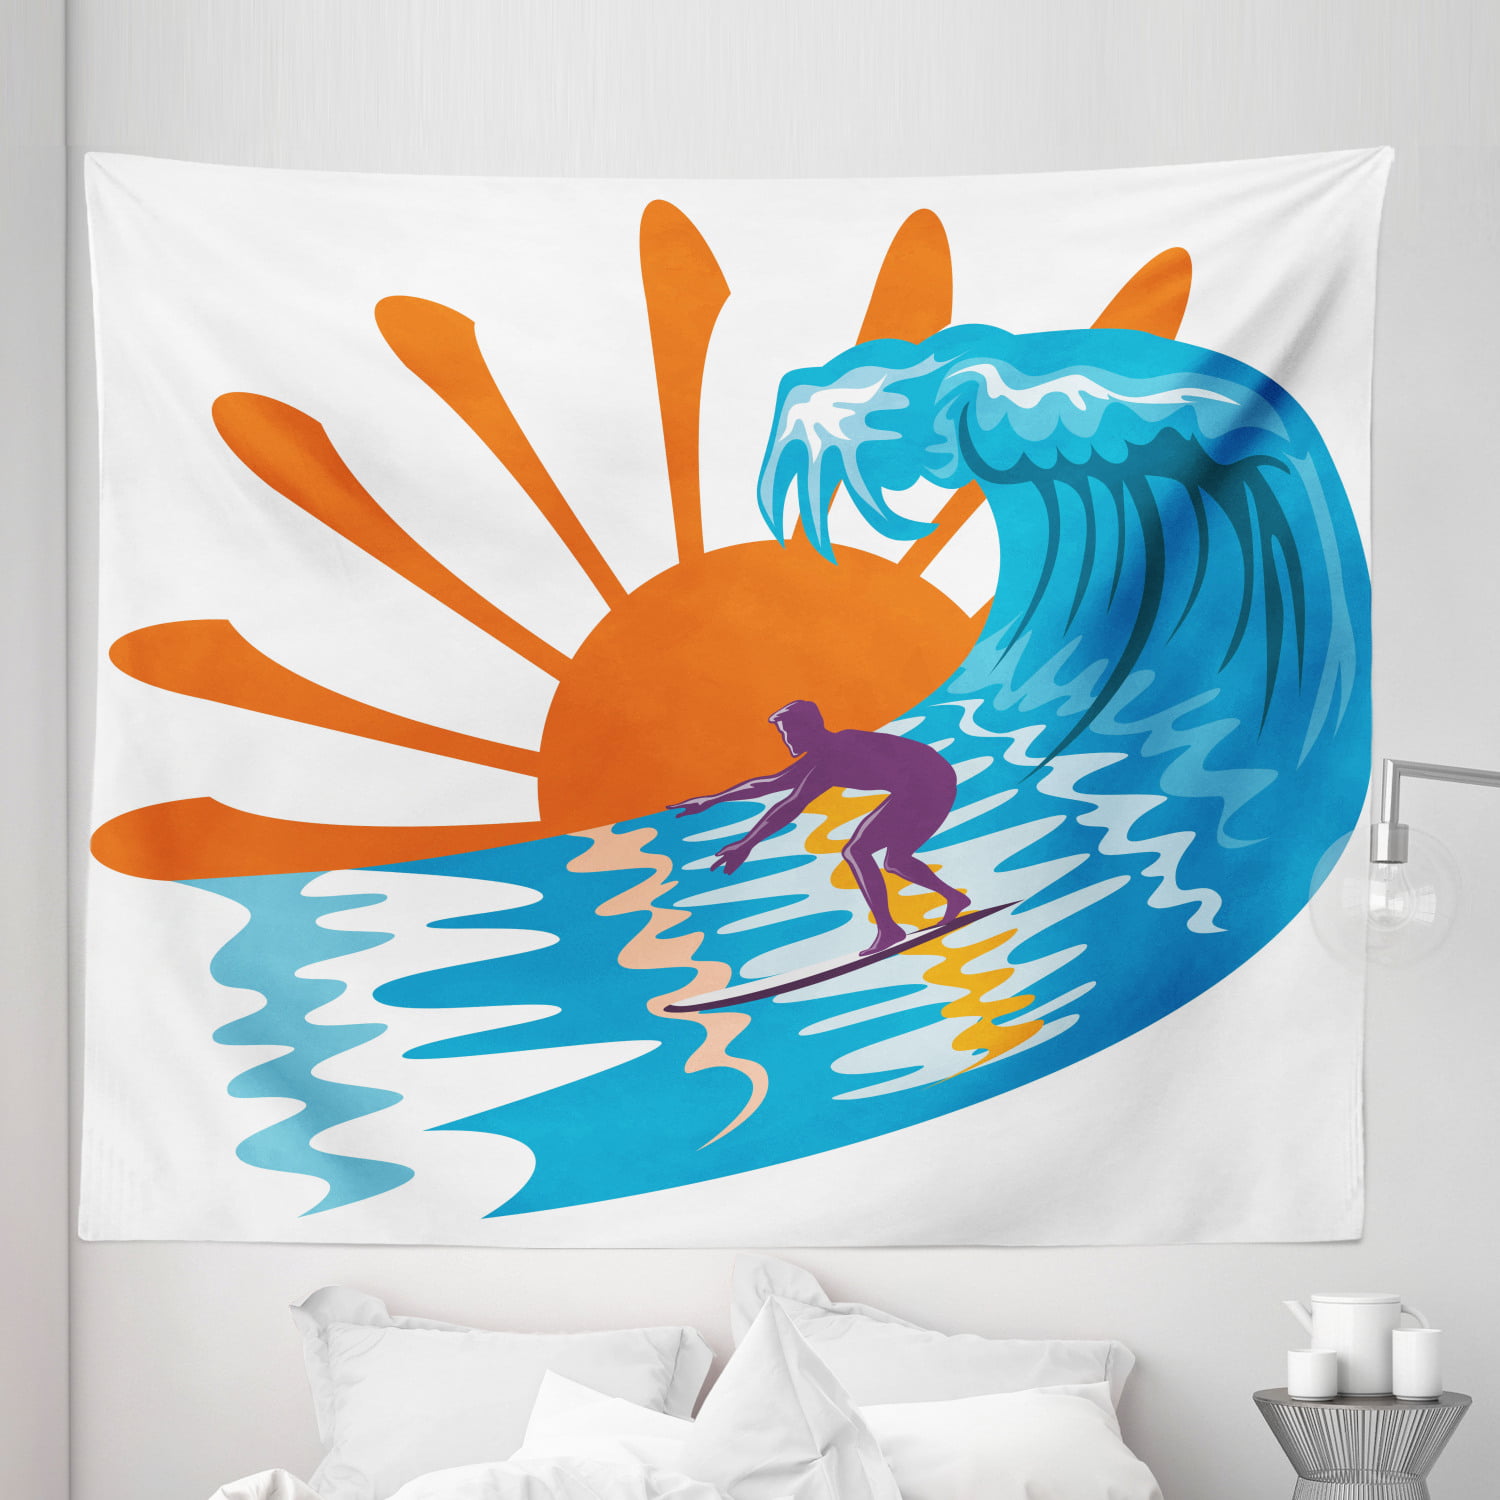 Surf Wave Wall Hanging Poster Tapestry Boho Hippie Beach Towel Art Home Decor 